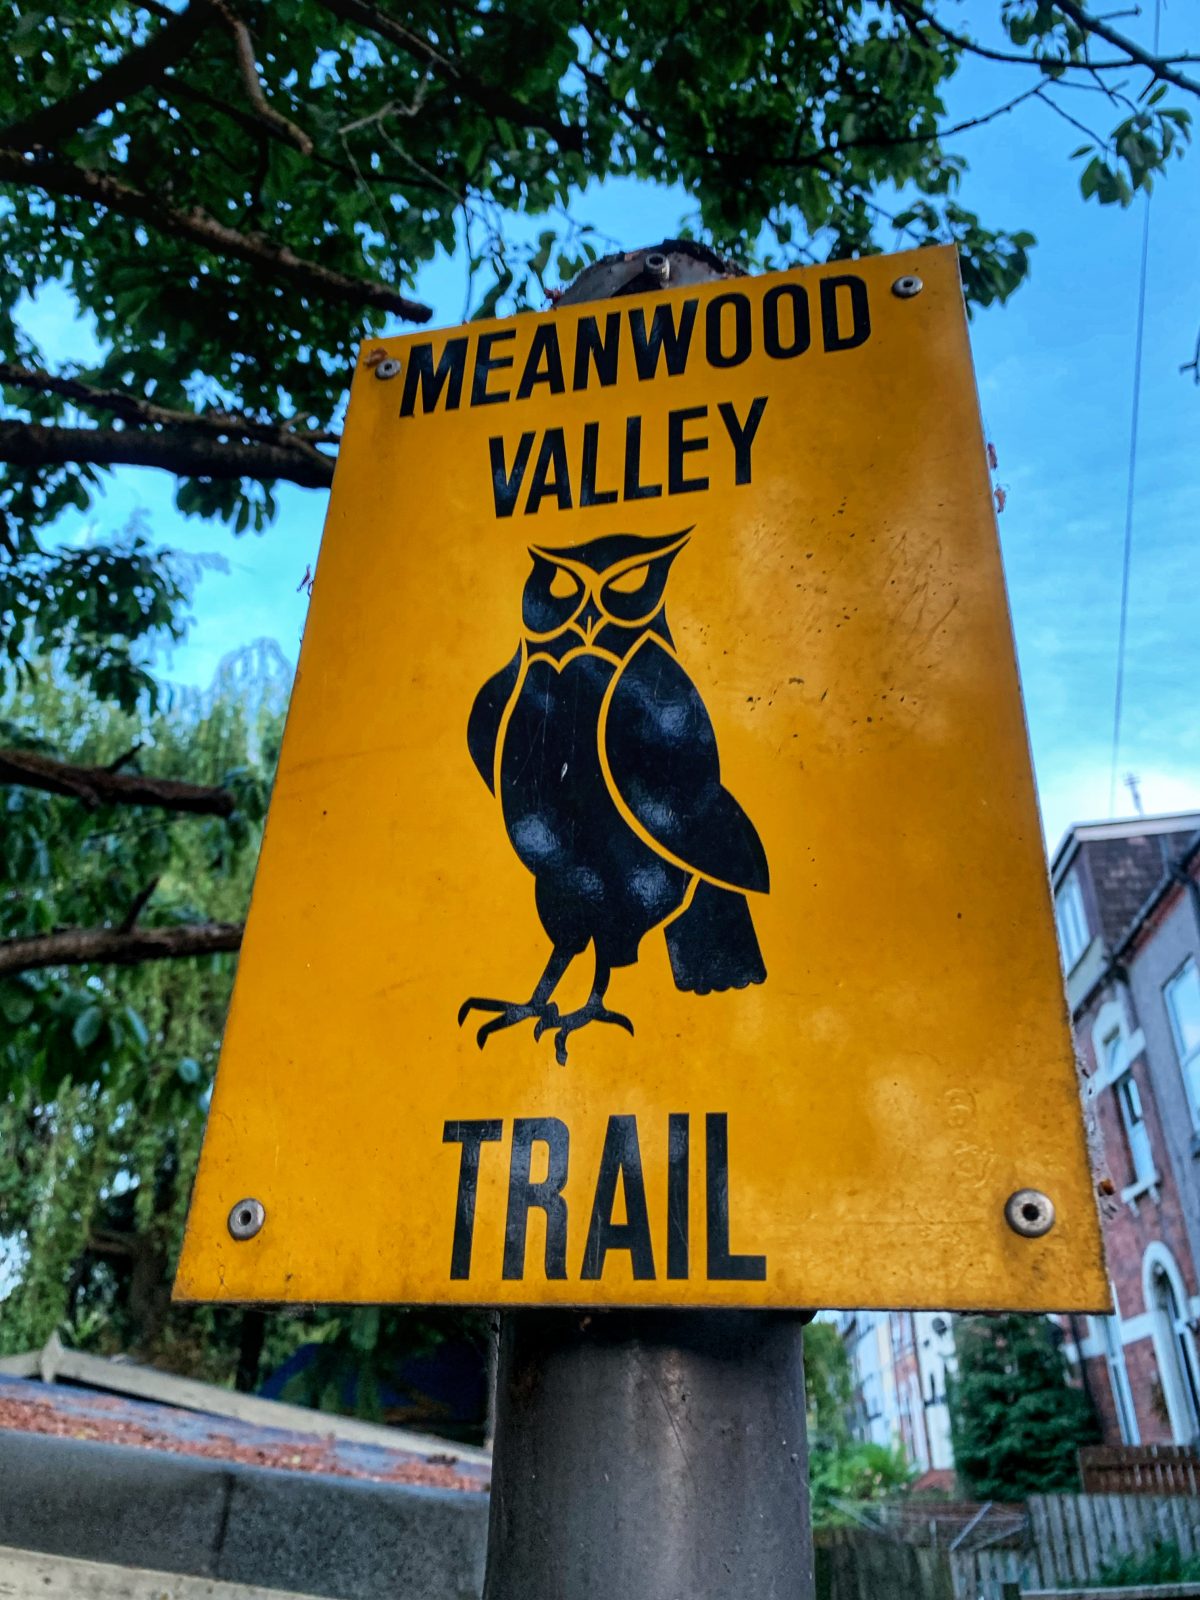 Meanwood Valley Trail sign.